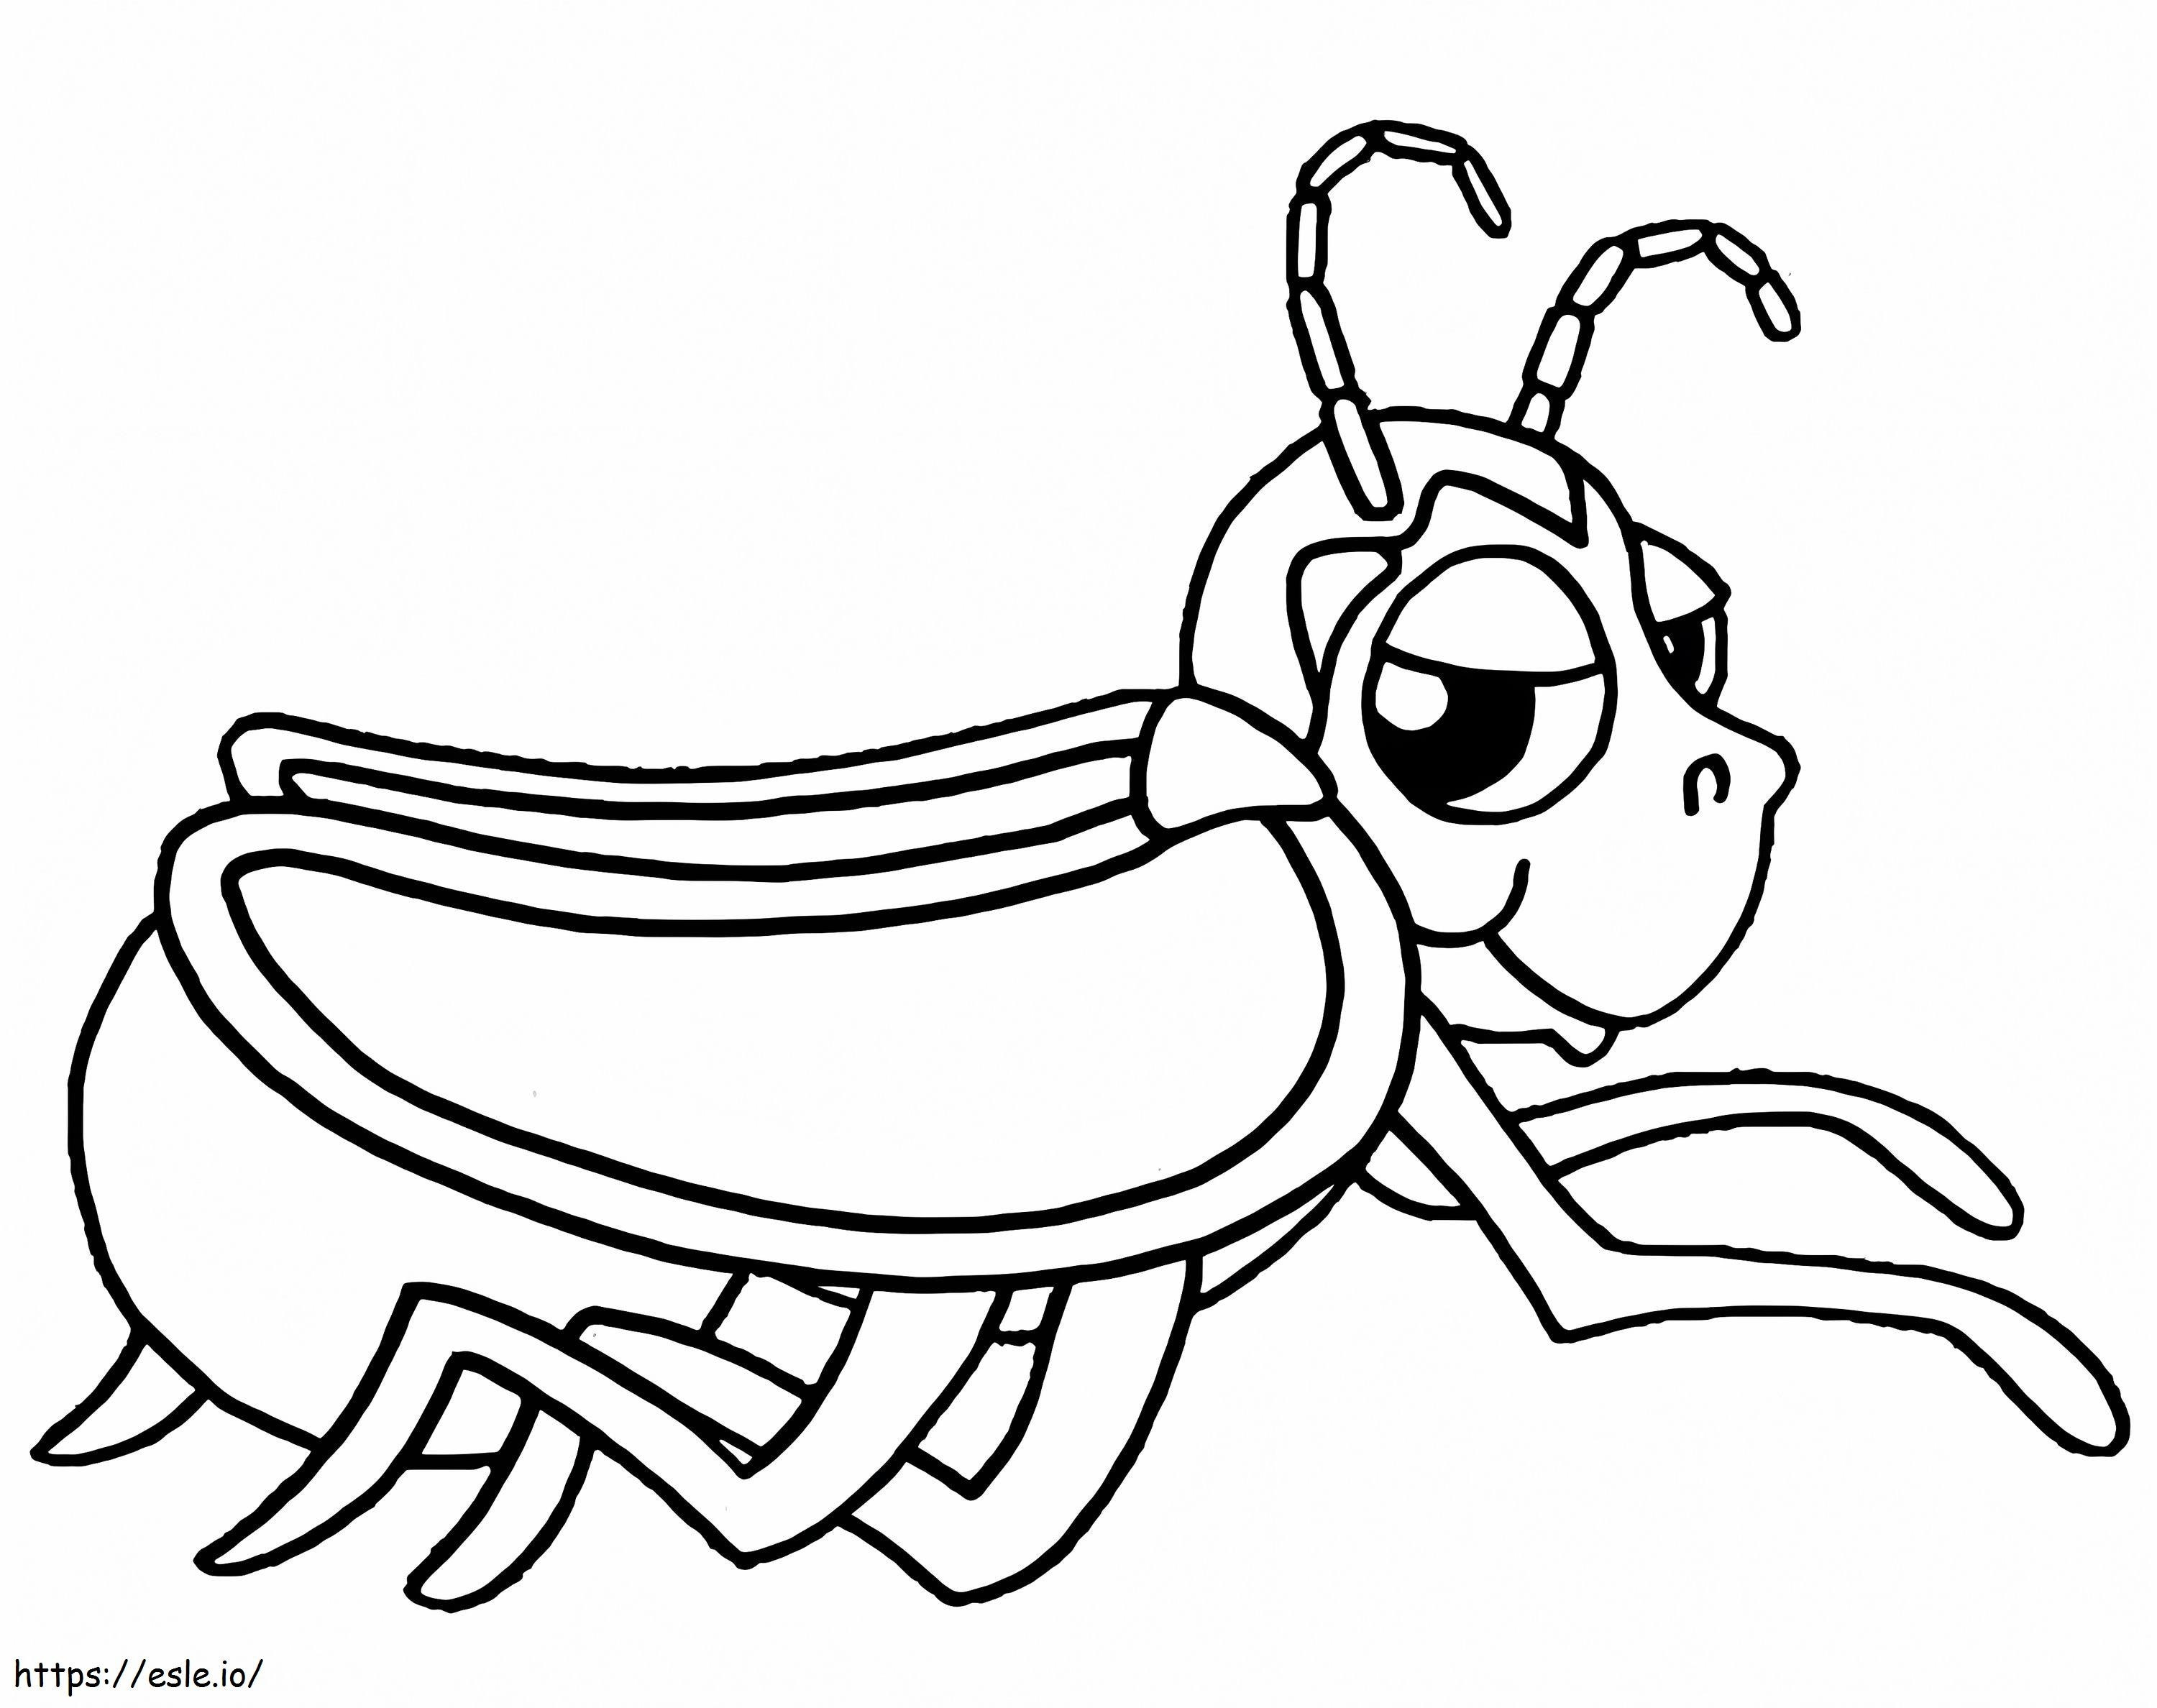 Tennessee Firefly coloring page